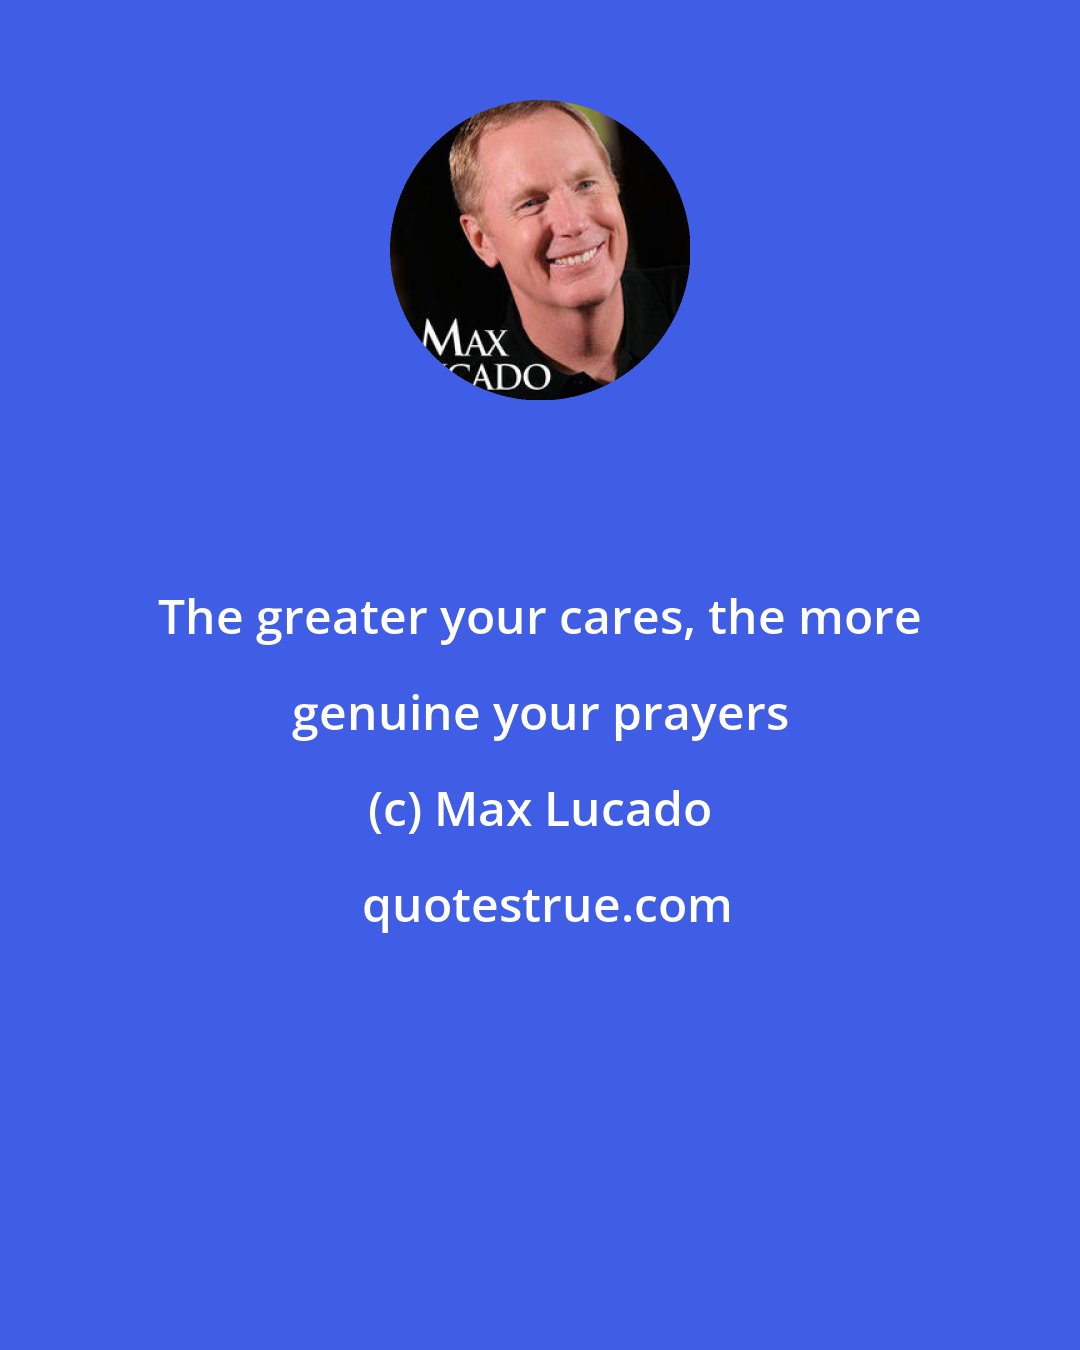 Max Lucado: The greater your cares, the more genuine your prayers